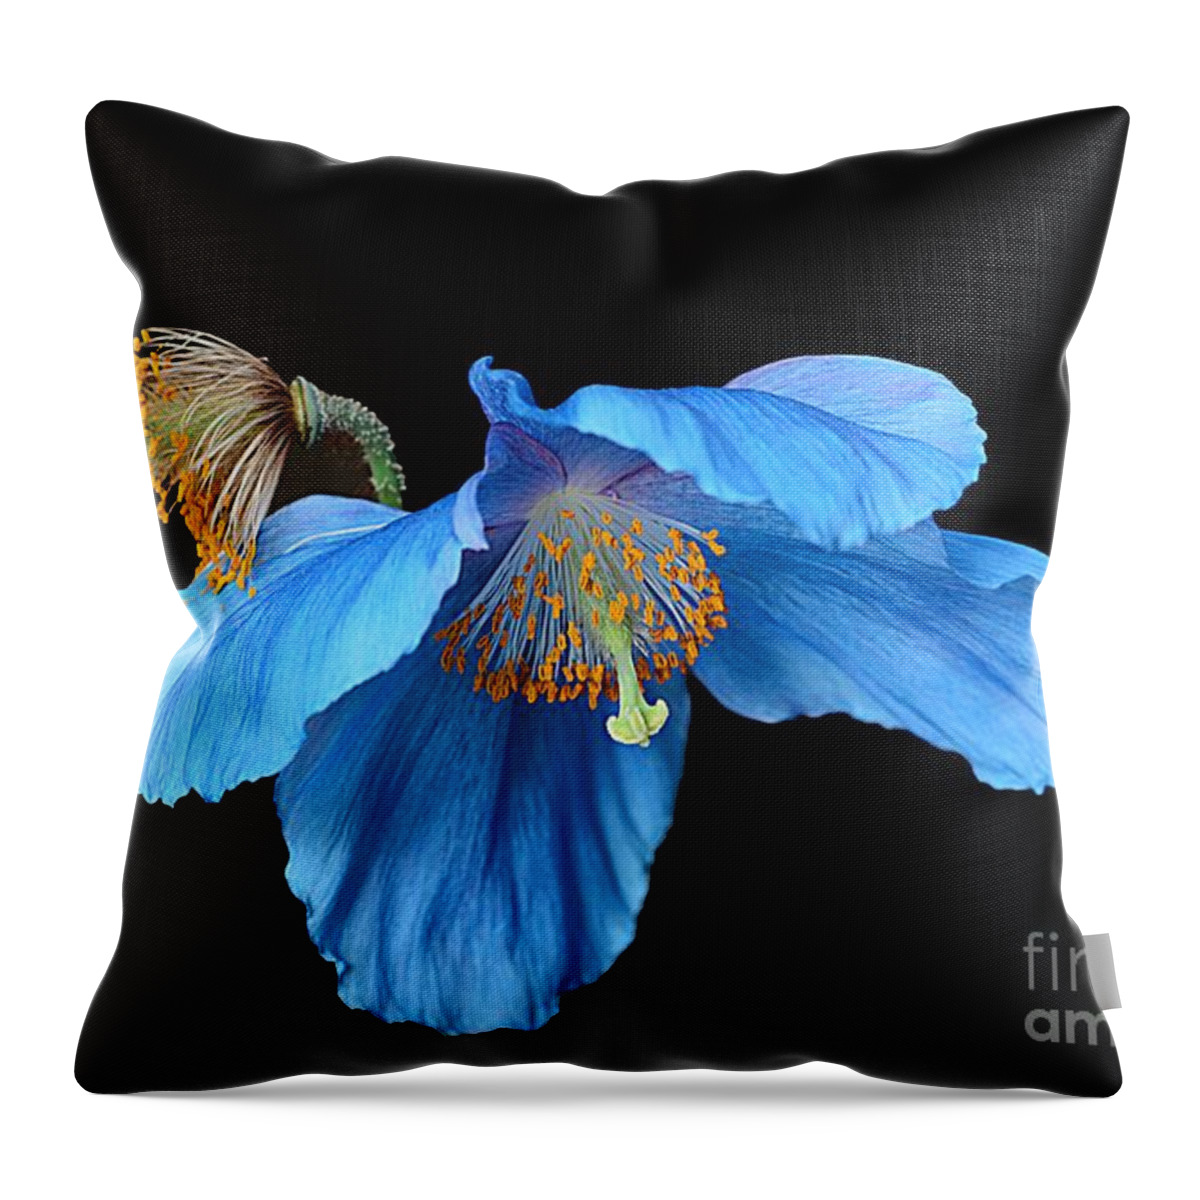 Poppy Throw Pillow featuring the photograph Blue Poppies by Cindy Manero